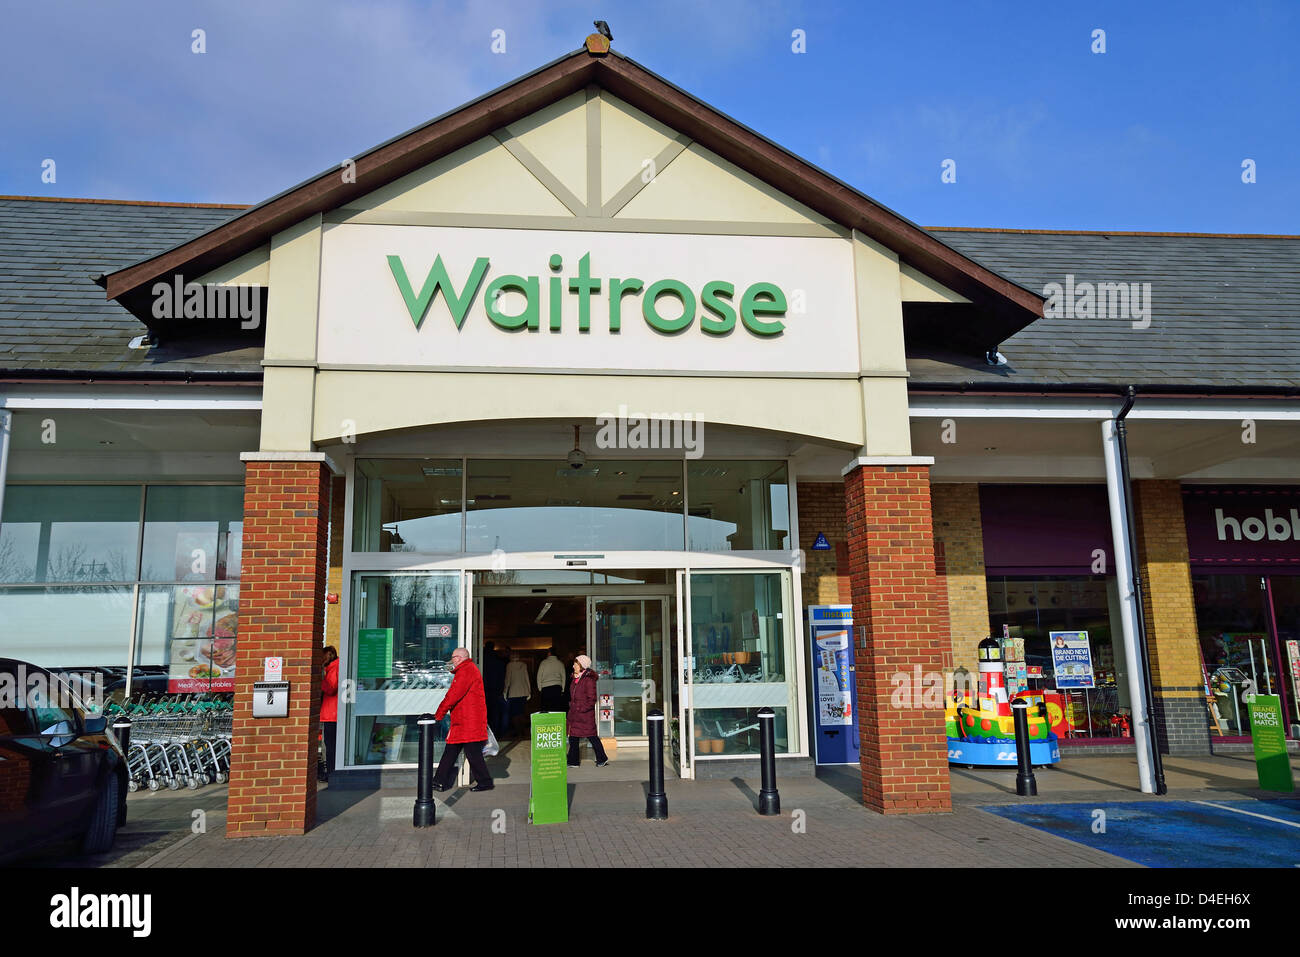 Waitrose supermarket in Two Rivers Shopping Centre, Staines-upon-Thames, Surrey, England, United Kingdom Stock Photo